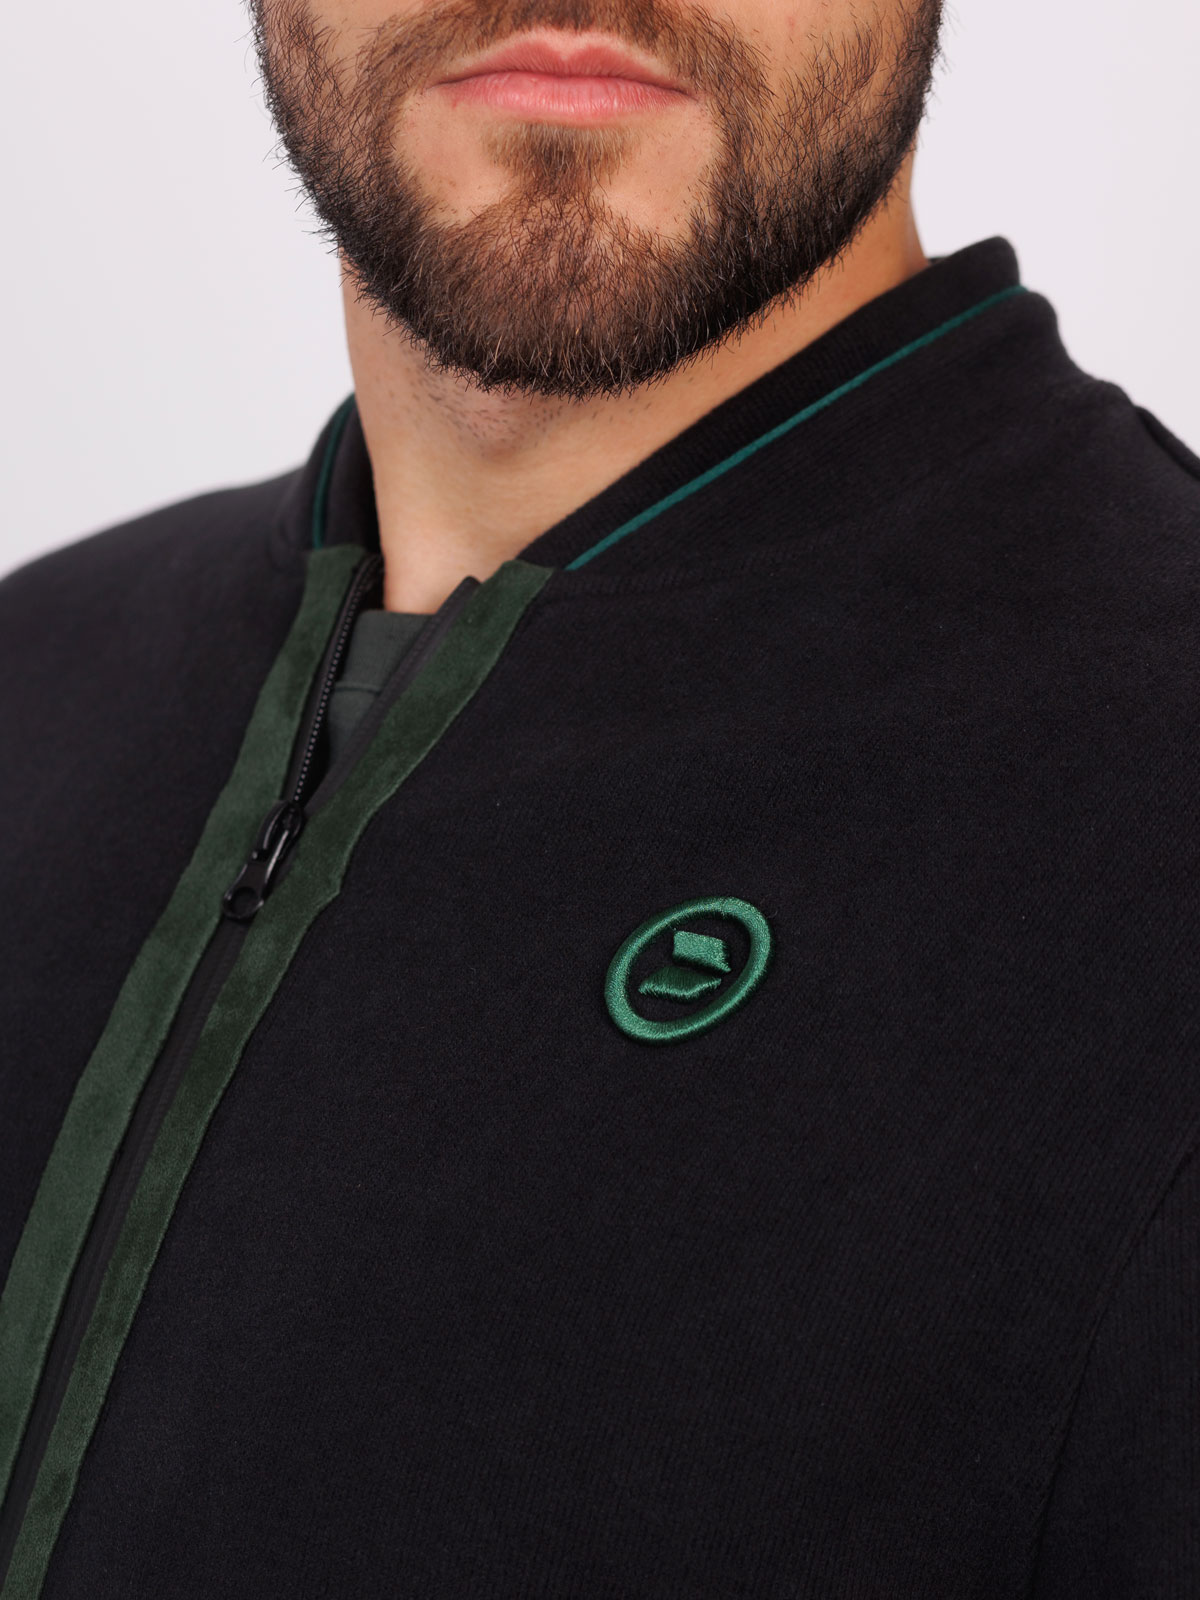 Sports sweatshirt with green accent - 28119 € 38.24 img3